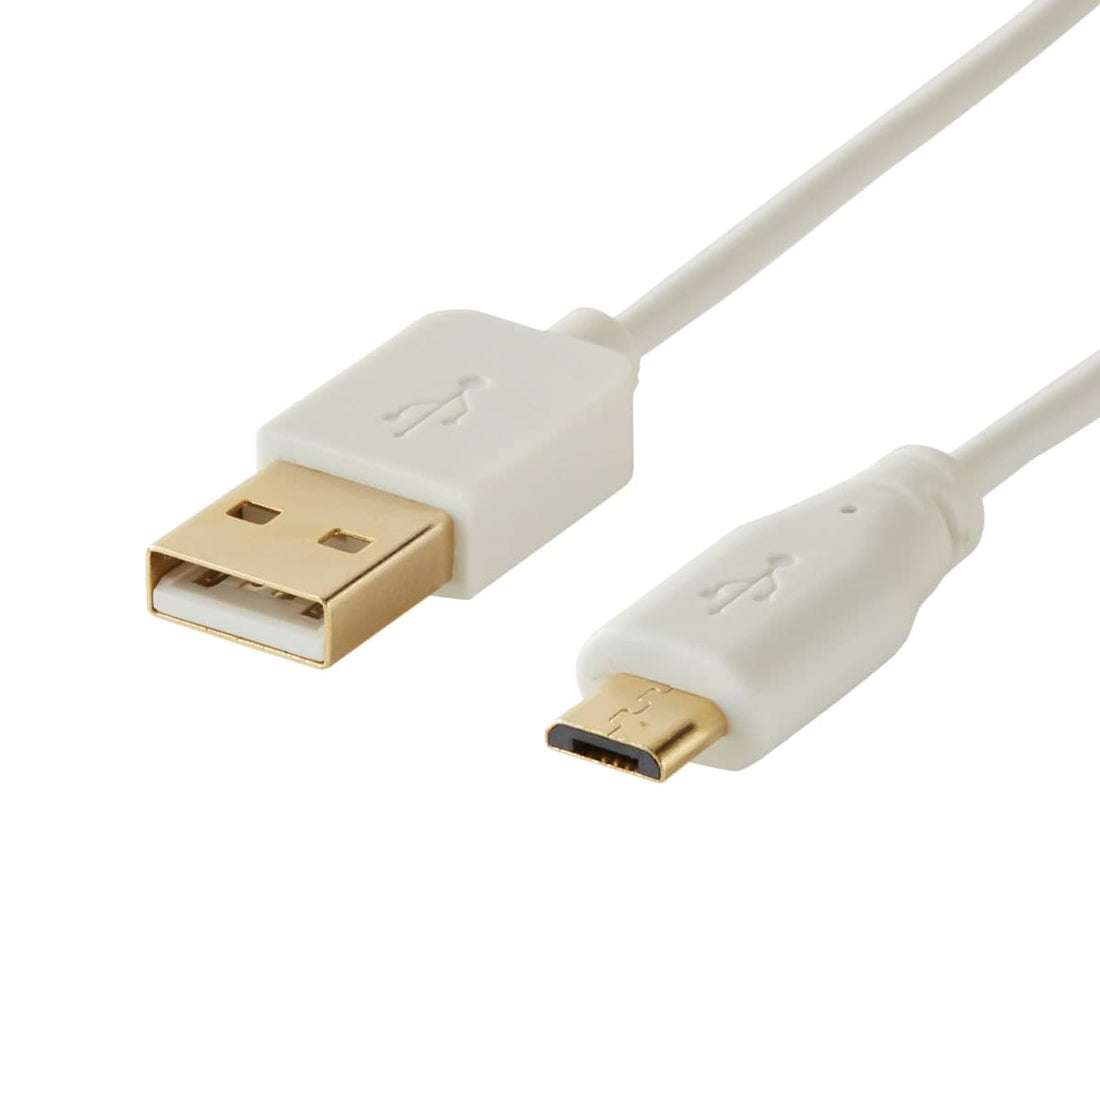 1 M USB 2.0 TYPE A/MICRO USB CABLE - best price from Maltashopper.com BR420005276